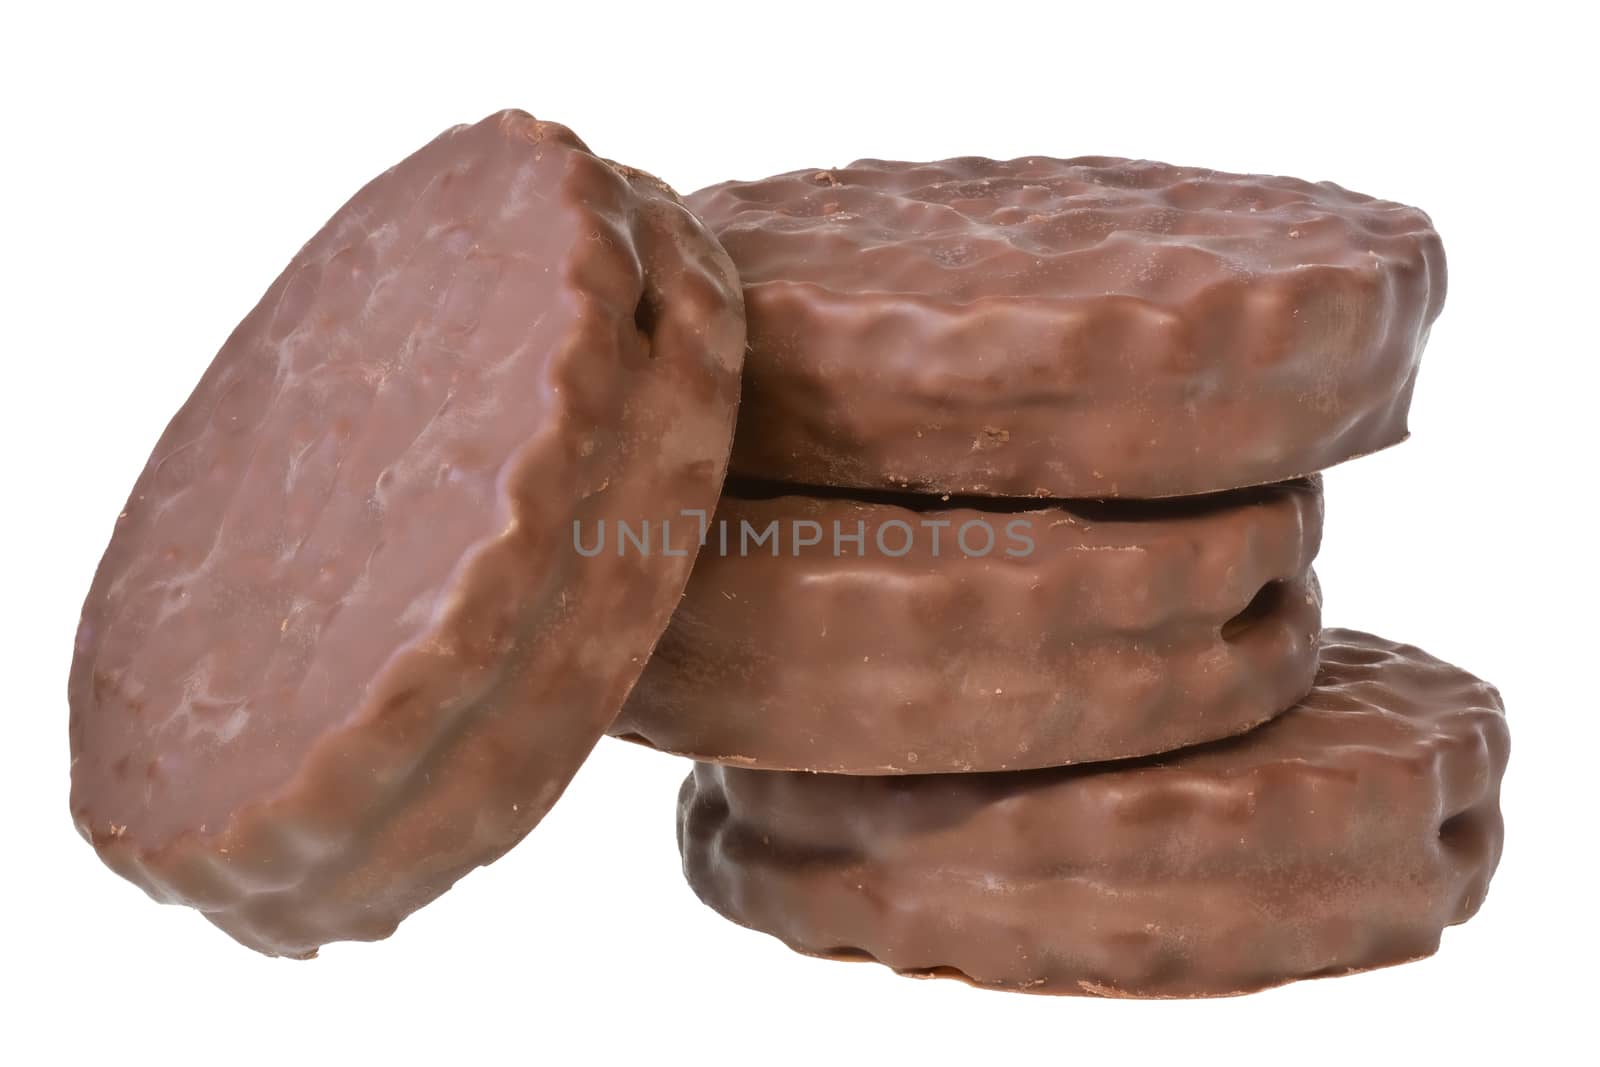 Shortbread cookie sandwich in chocolate icing isolated on a white background.